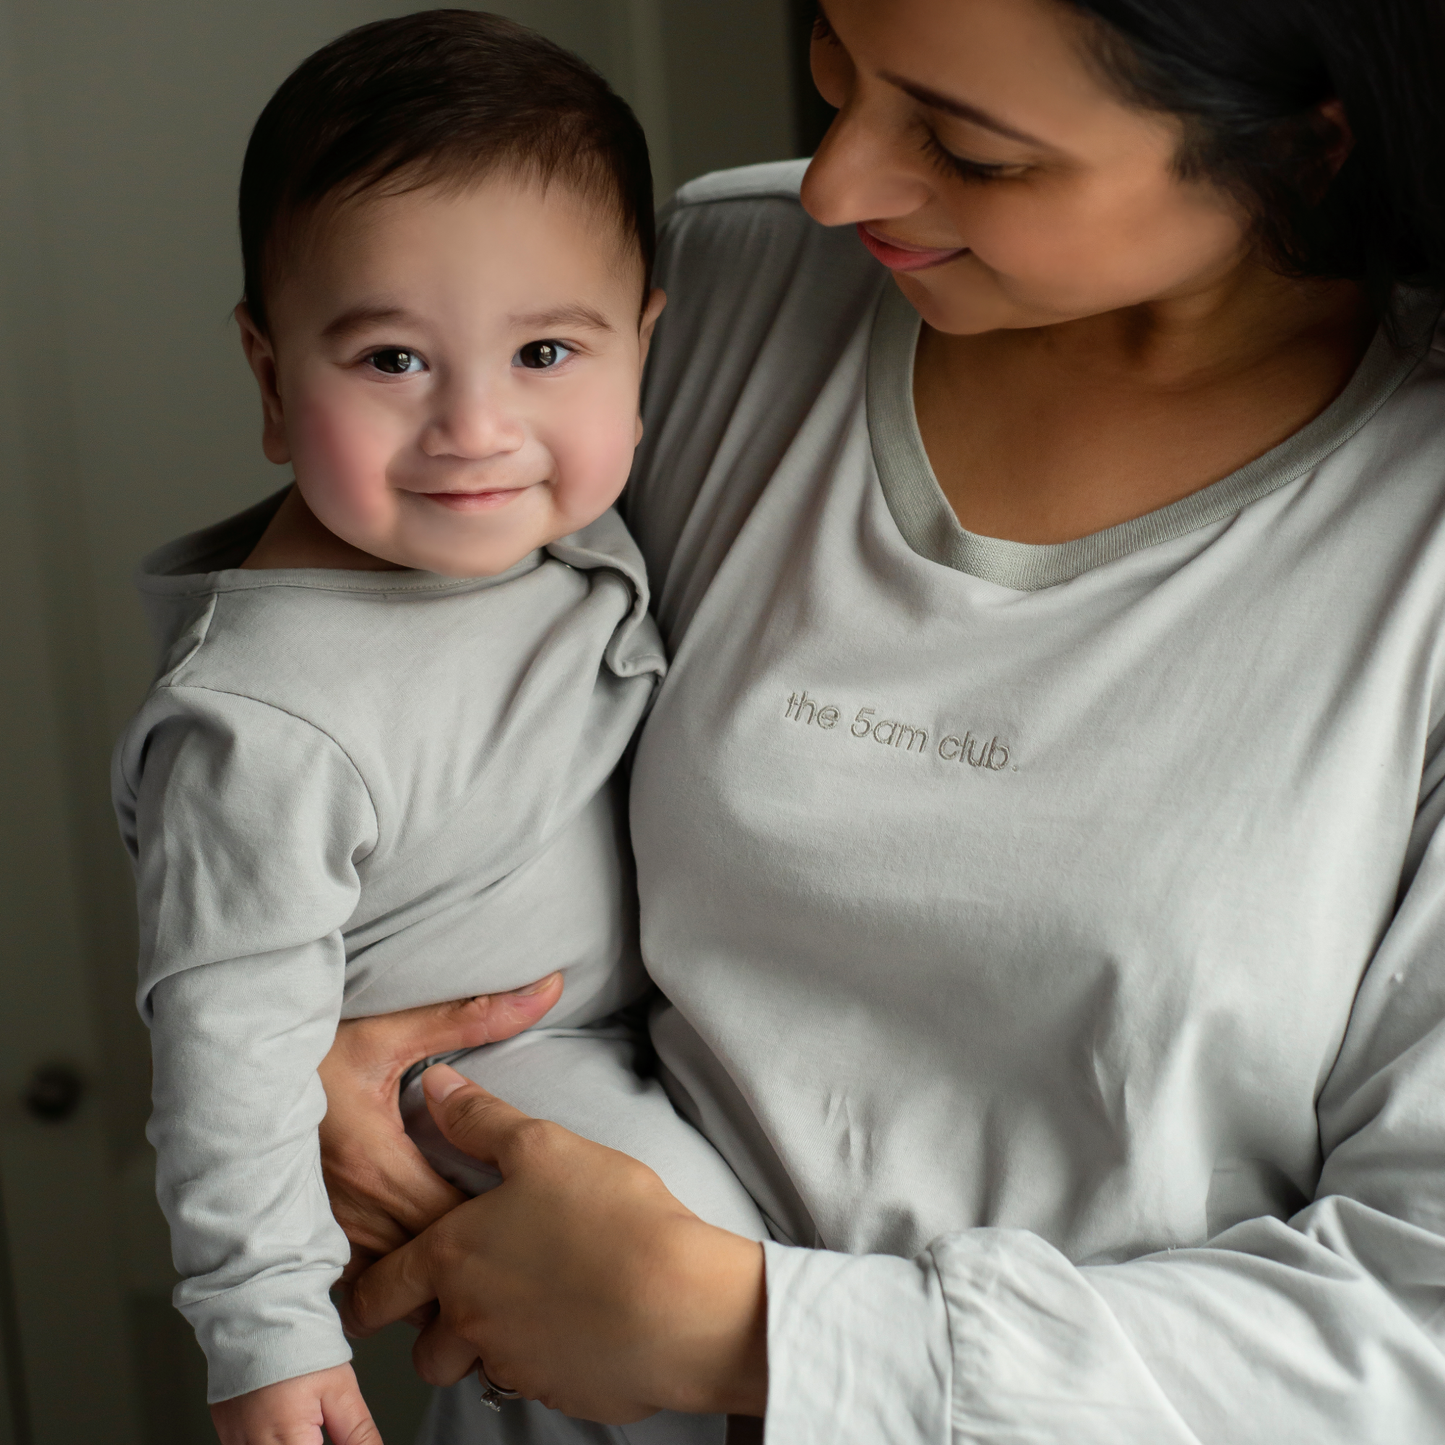 light grey babygrow with the 5am club logo on the chest and silver poppers down the front